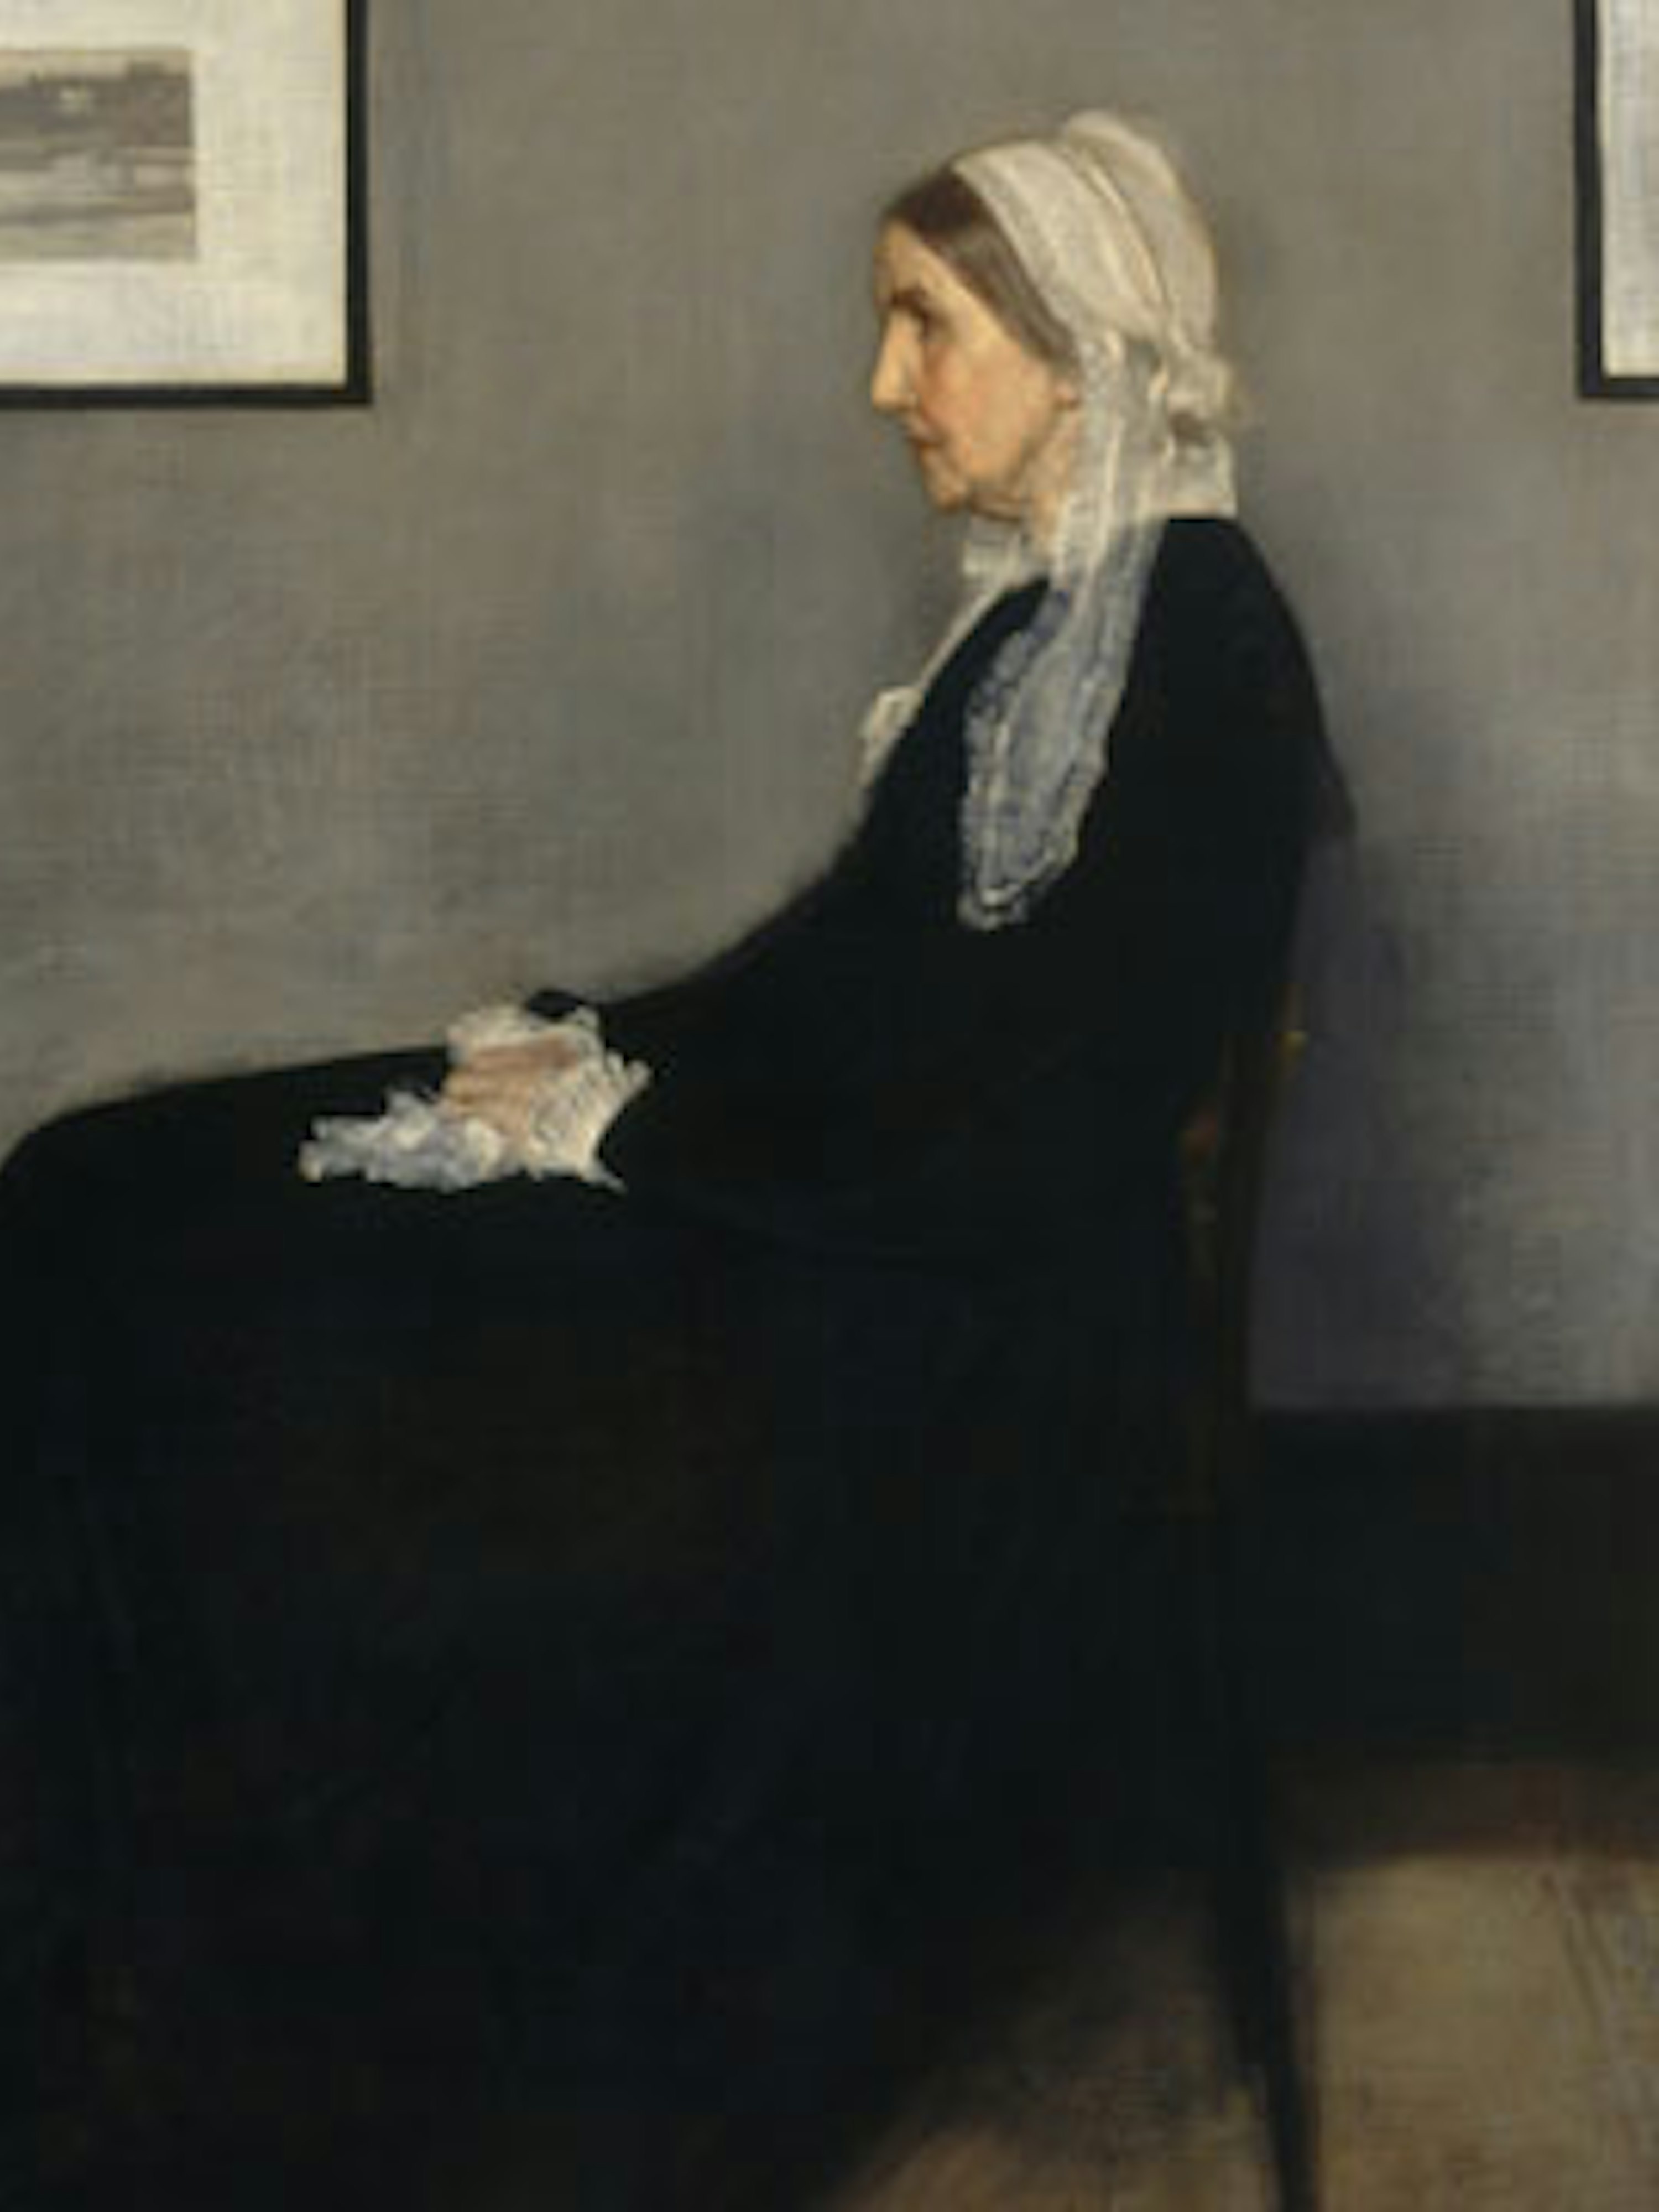 Whistler’s Mother: An American Icon Returns to the Art Institute of